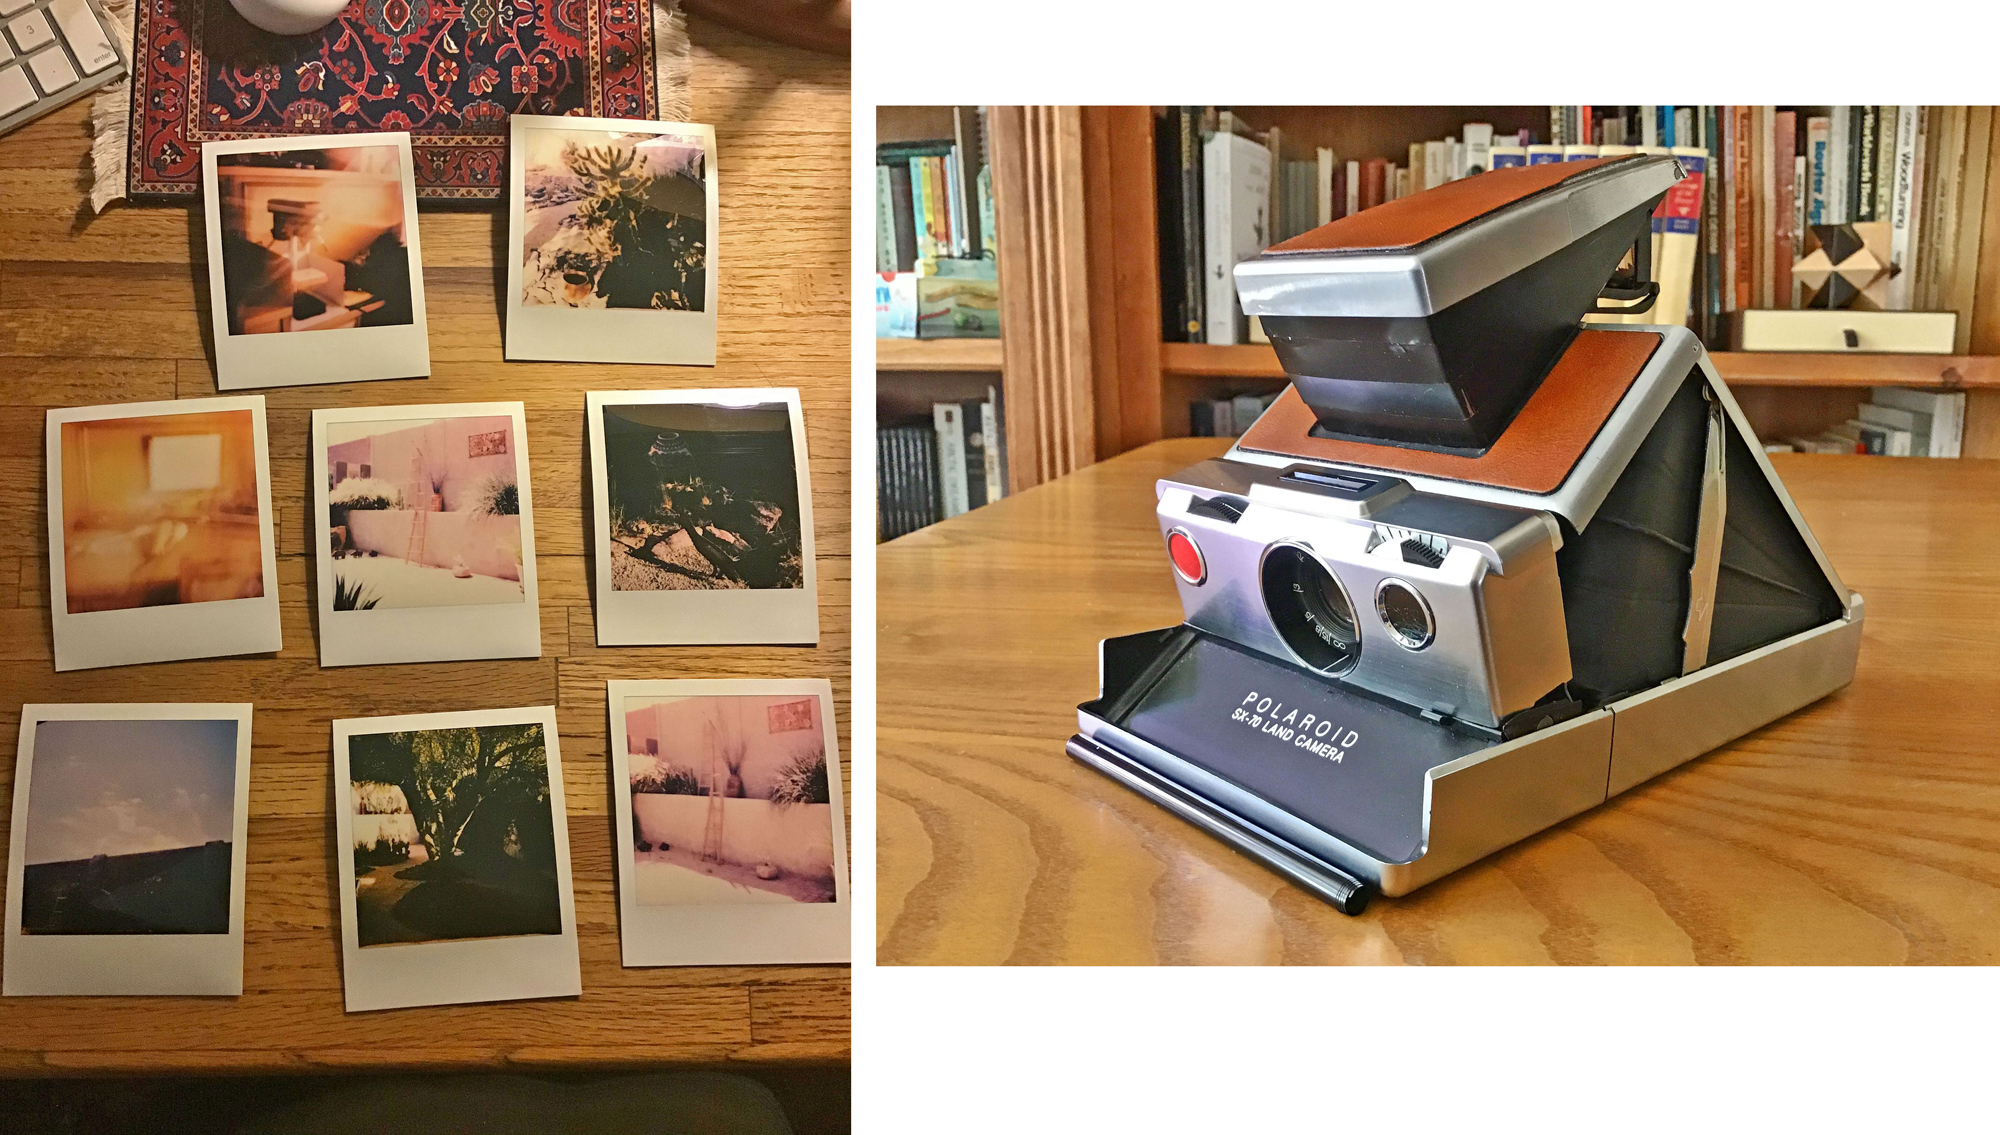 The photographs I created using the SX 70 and Impossible Project film